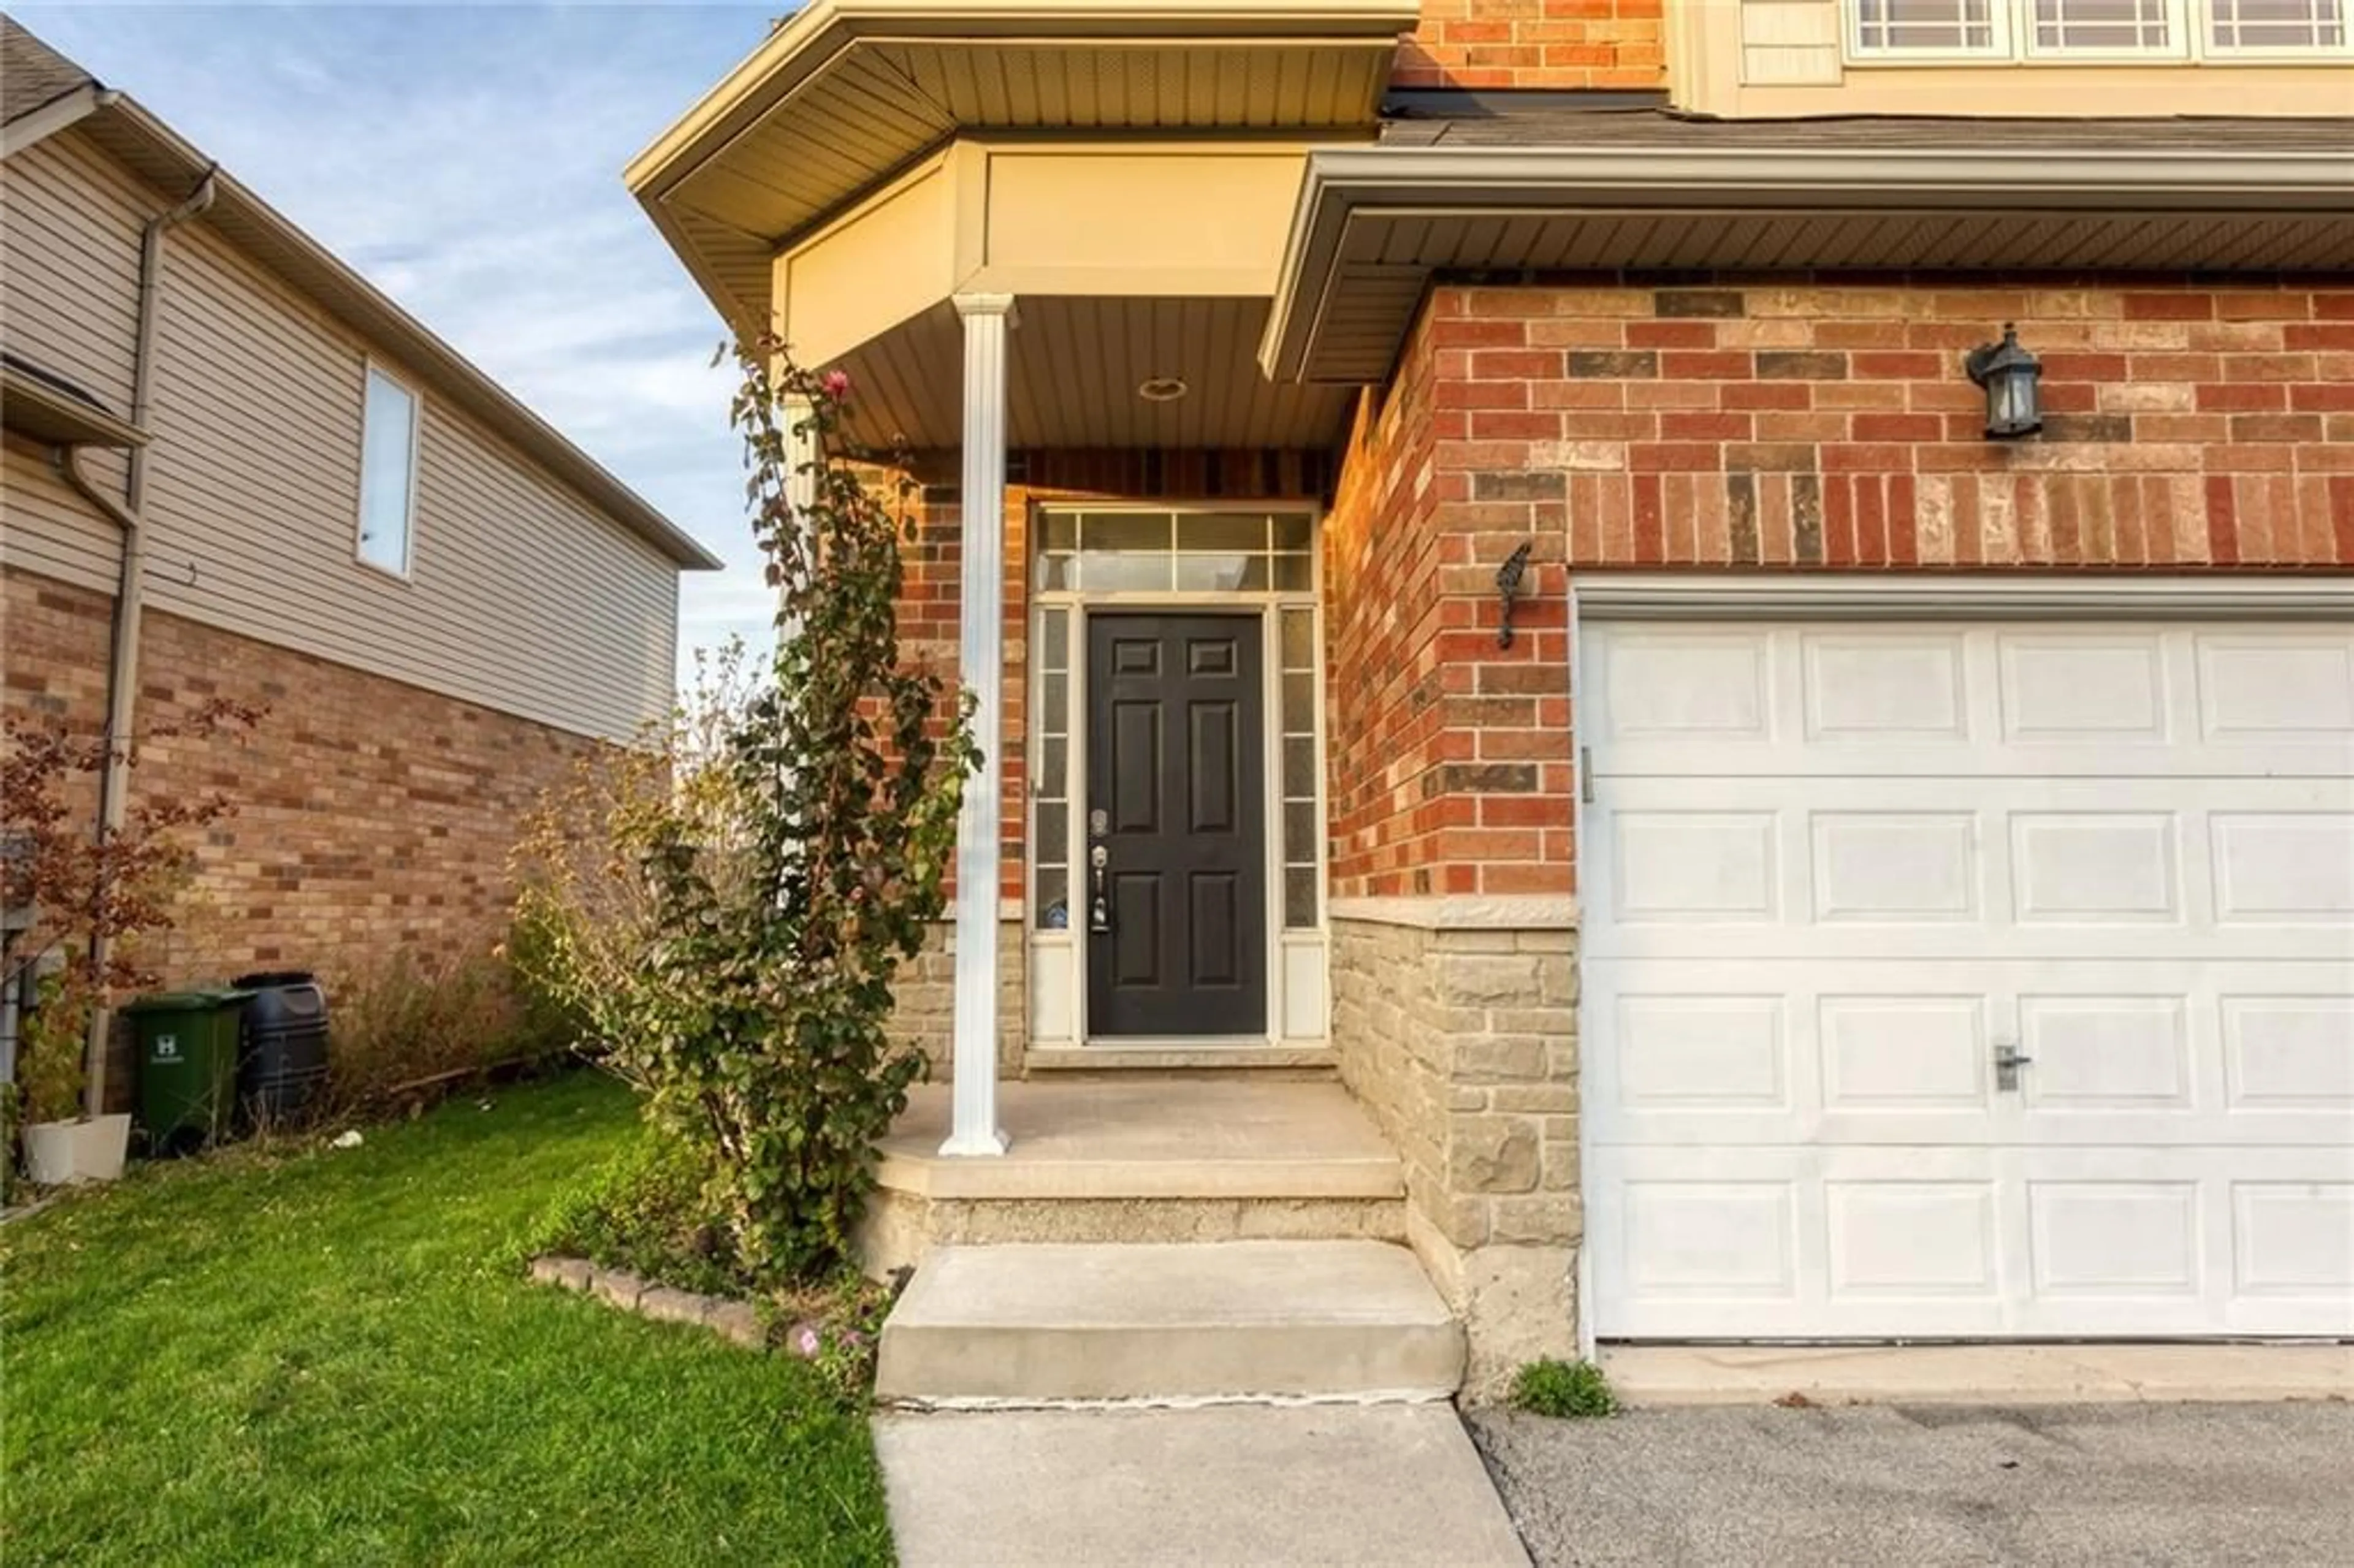 Home with brick exterior material for 150 BENZIGER Lane, Stoney Creek Ontario L8E 6G6